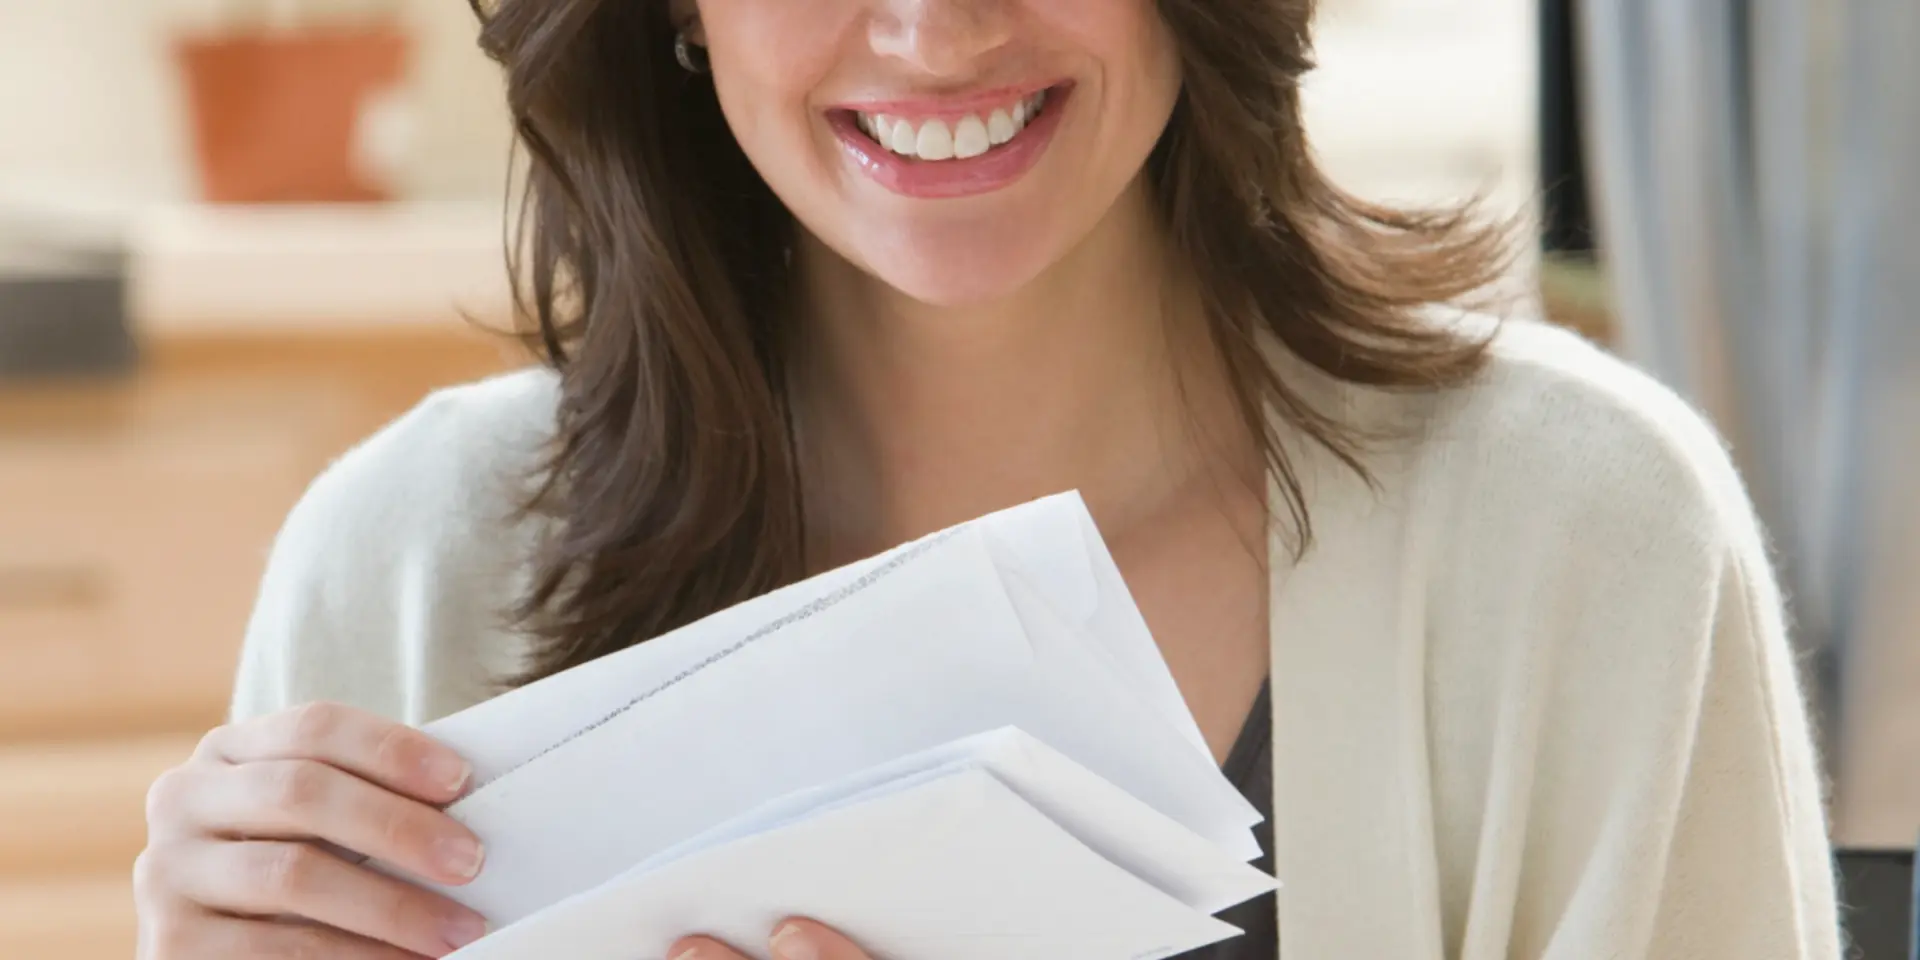 Woman smiling and holding a stack of envelopes.